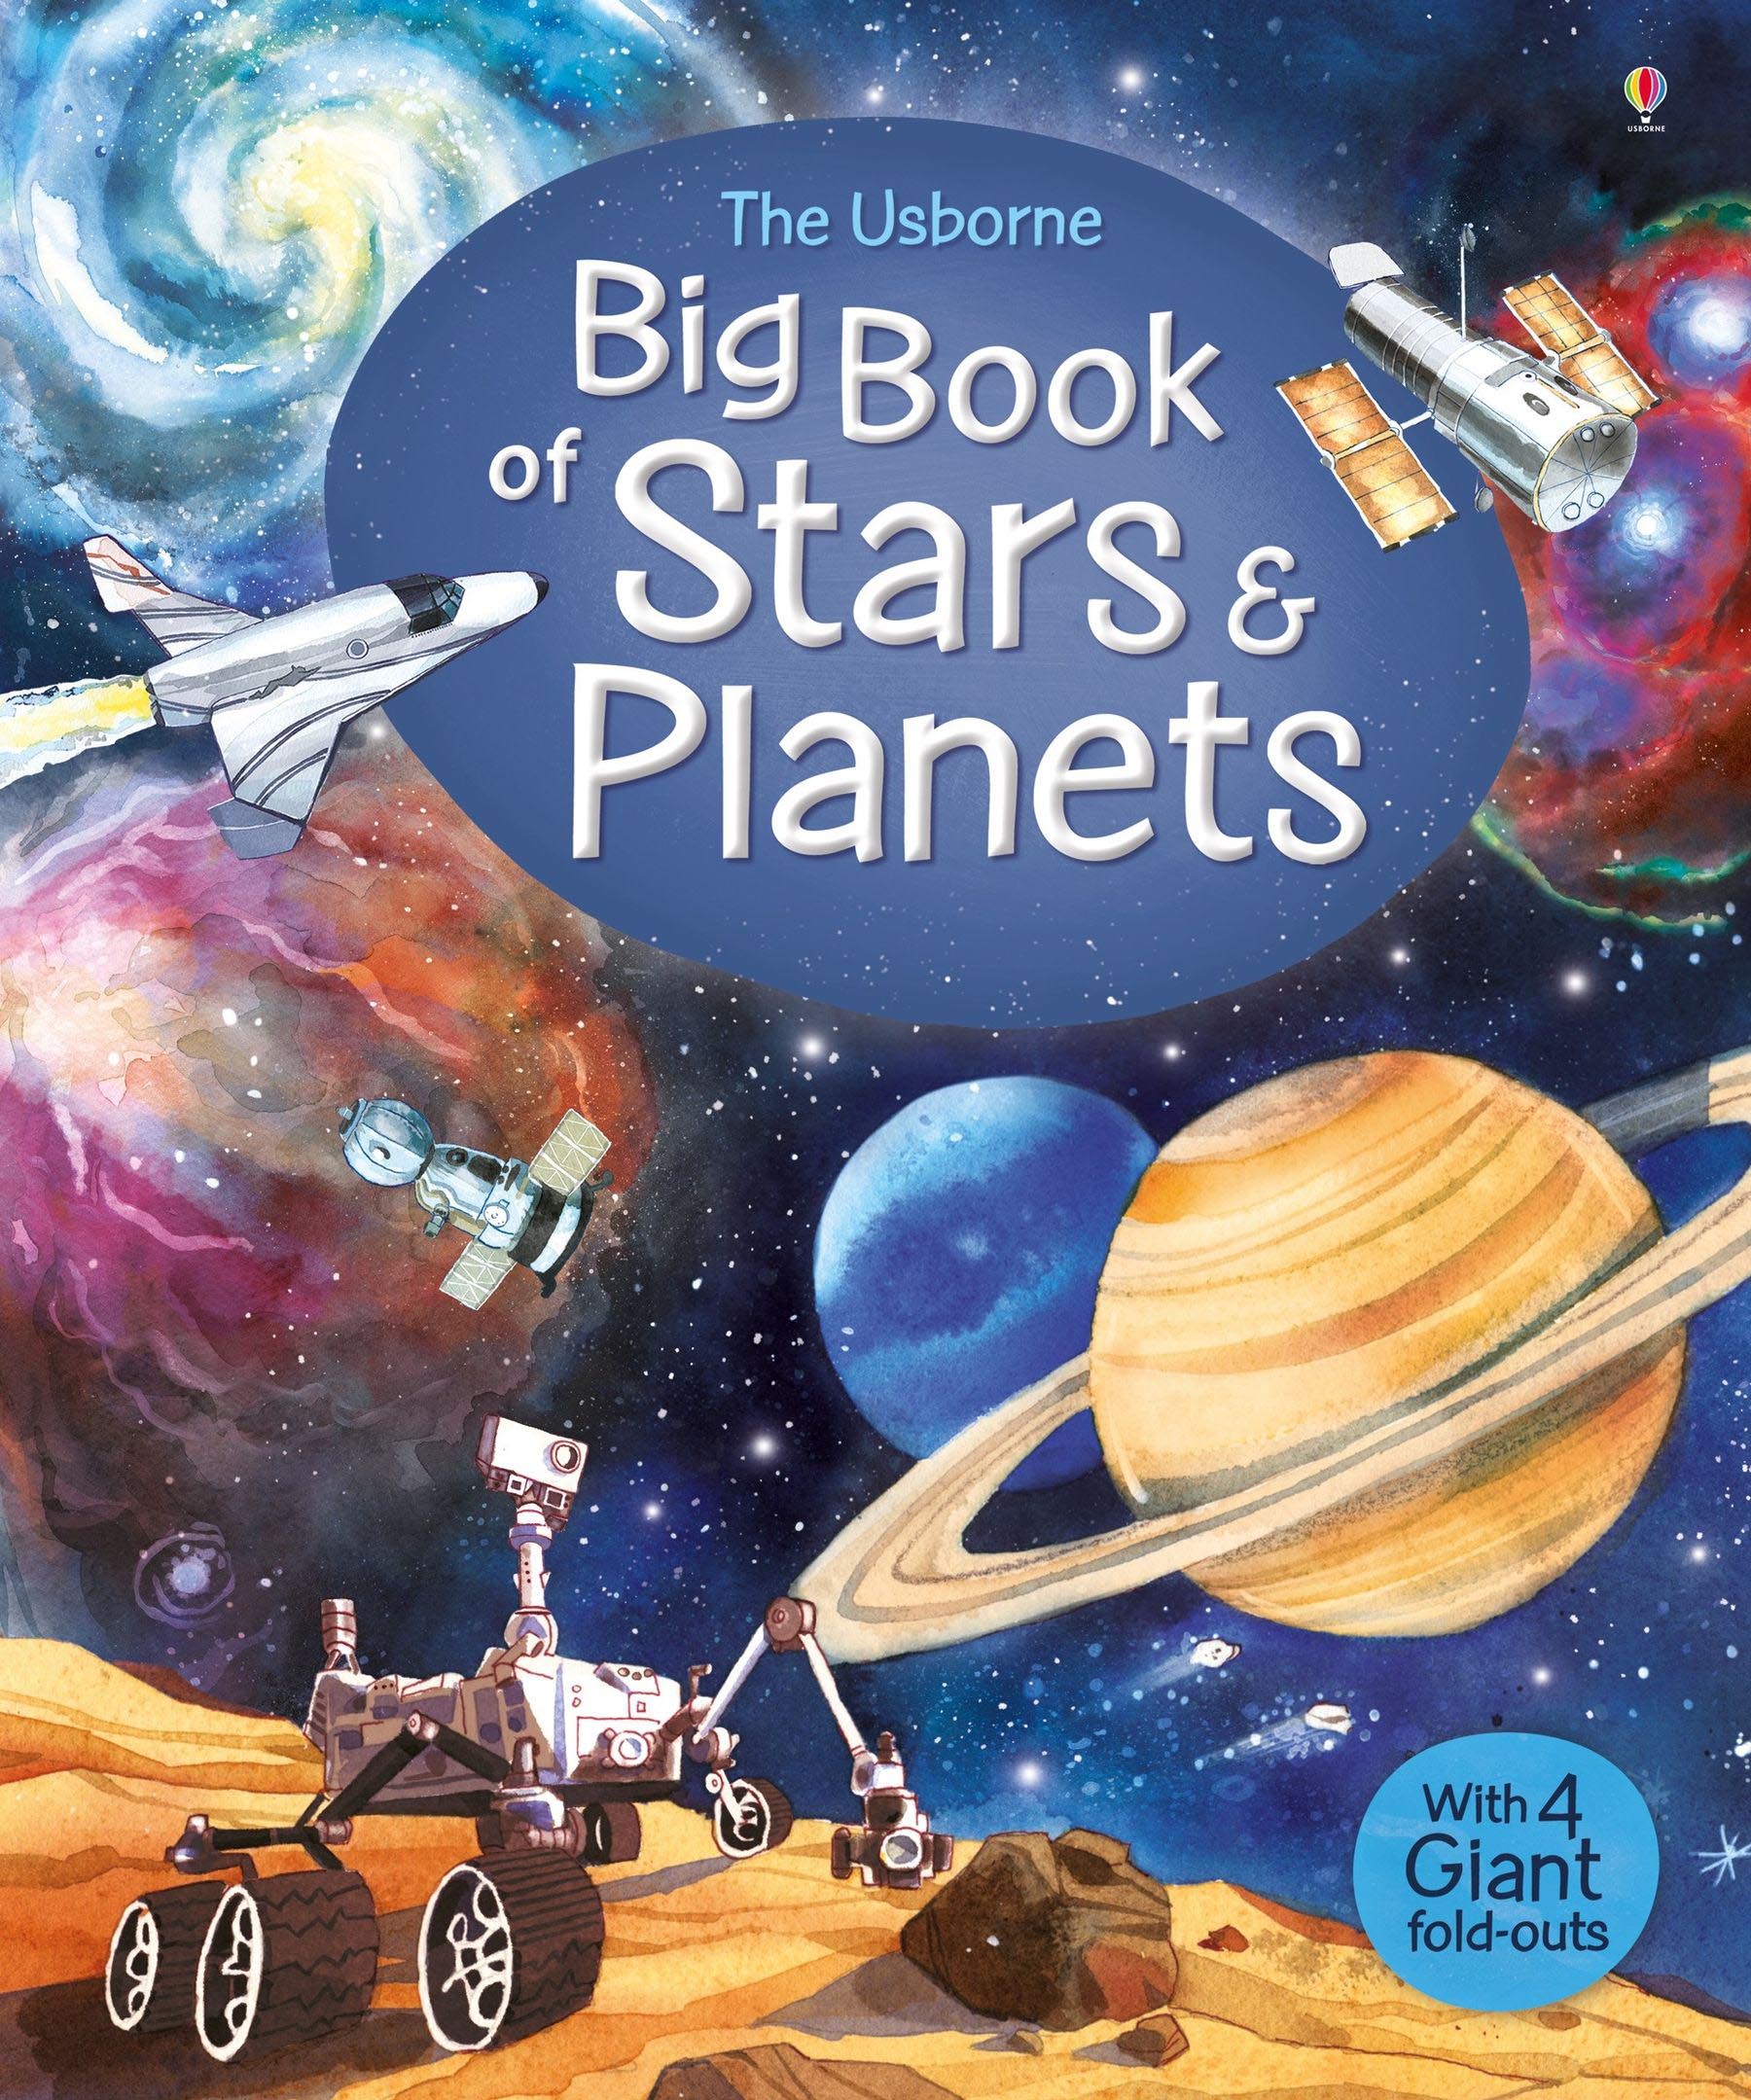 The Usborne Big Book of Stars and Planets